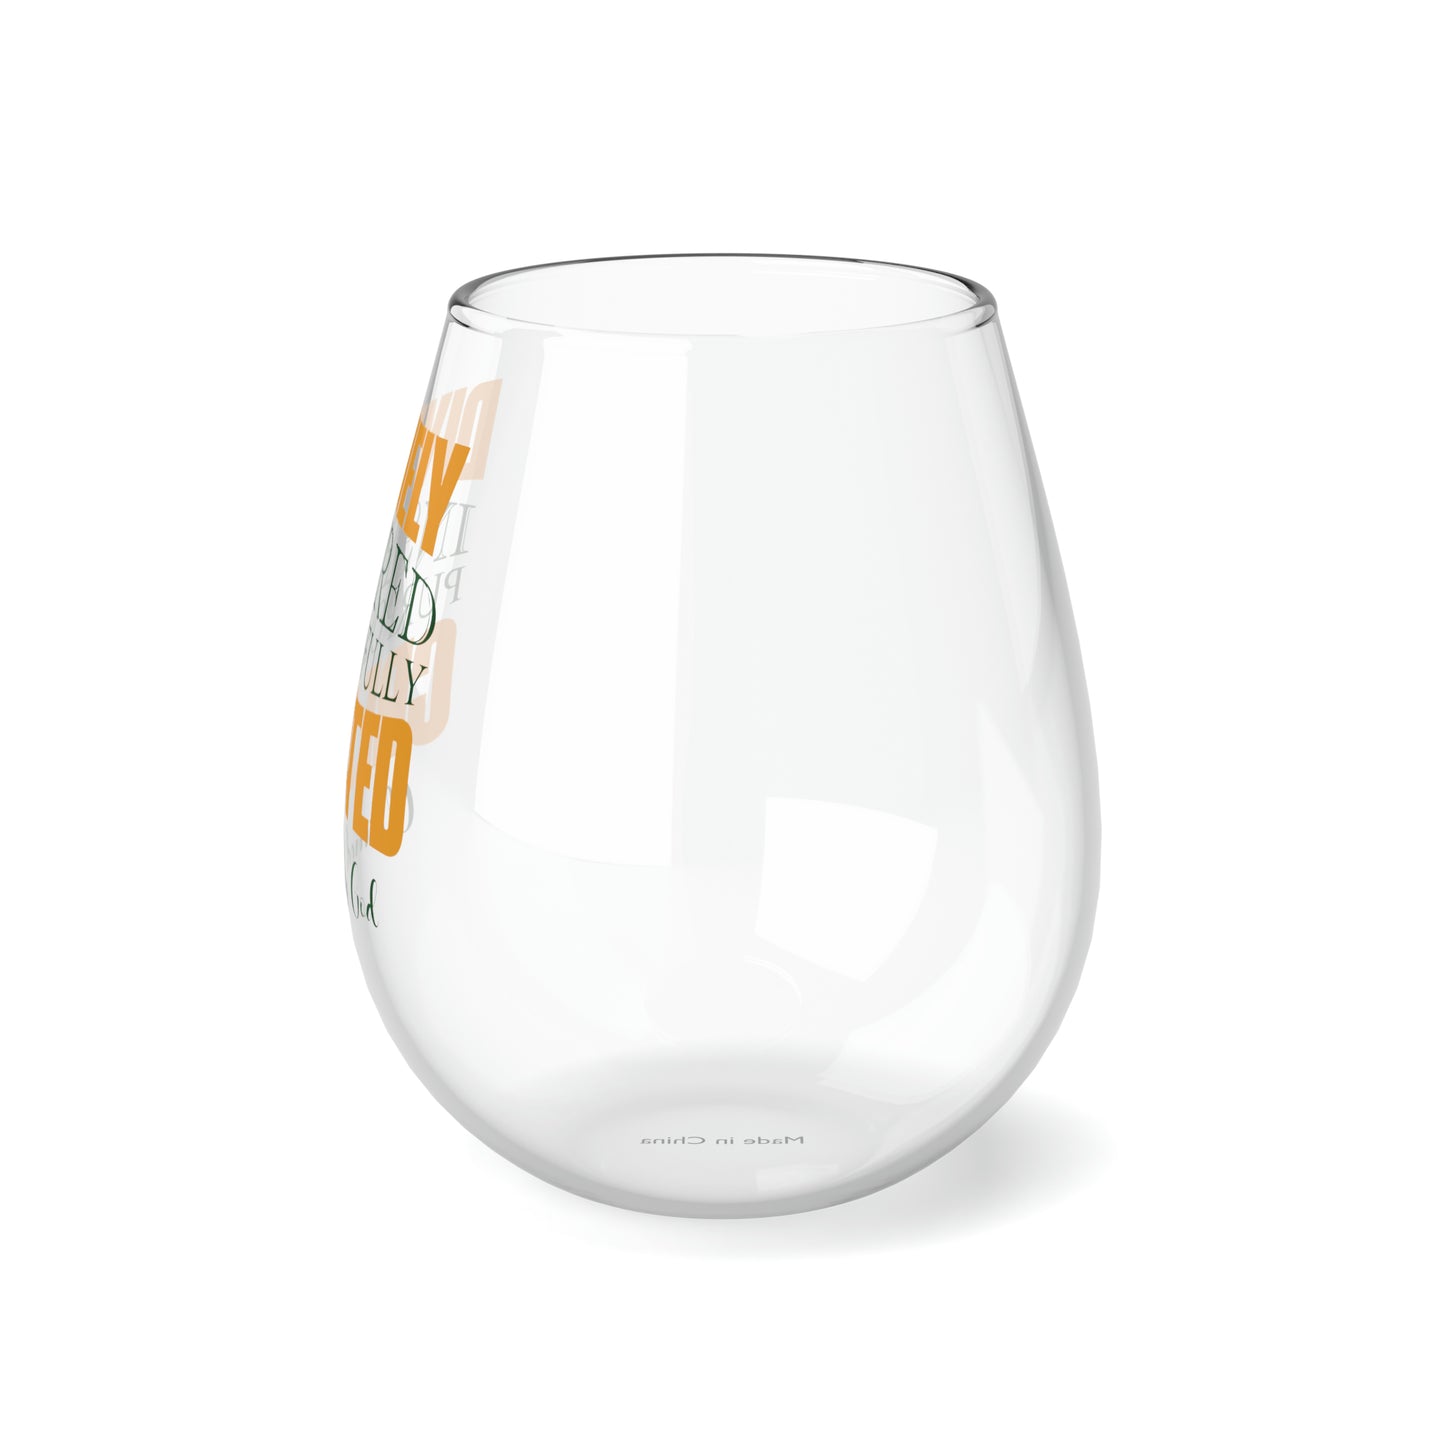 Divinely Inspired Purposefully Created Stemless Wine Glass, 11.75oz